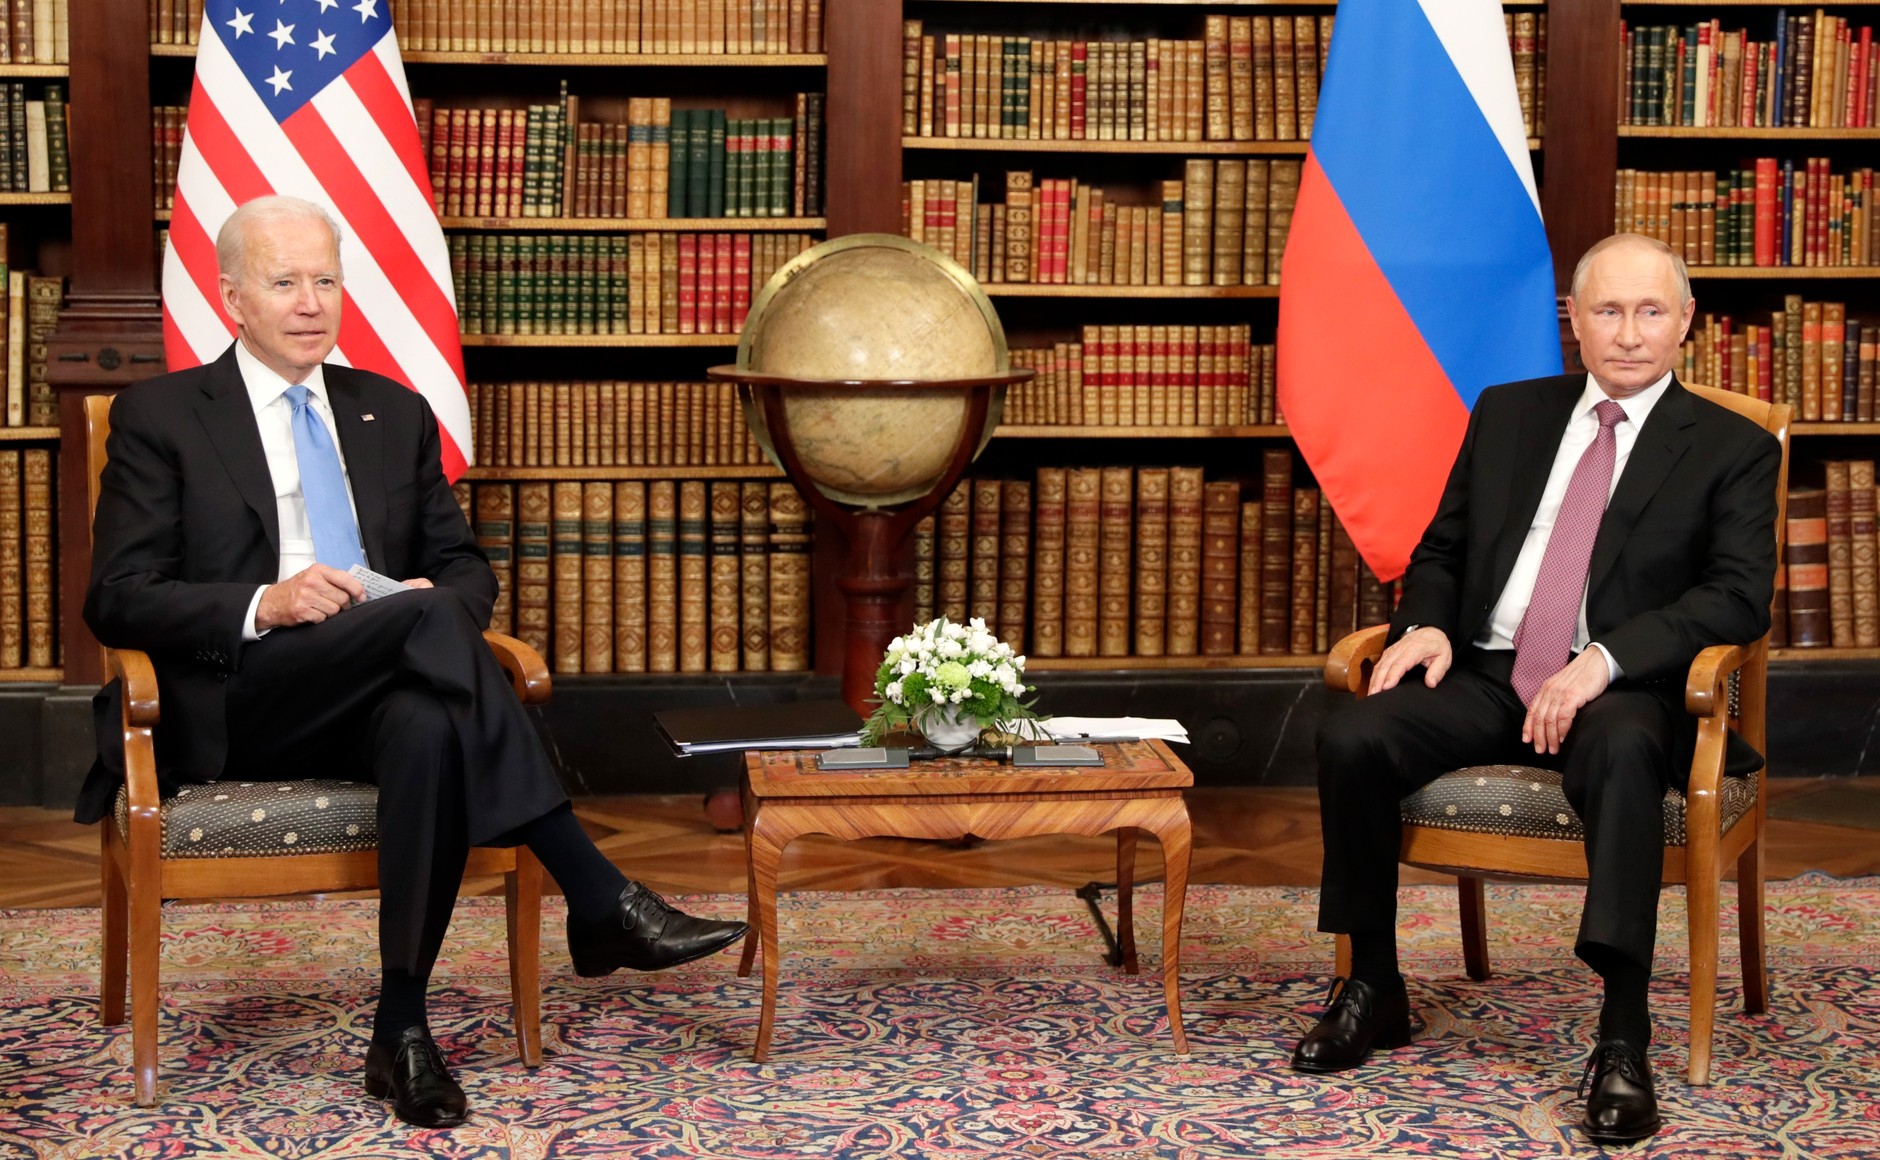 Talking is not only good for the US and Russia, but also for the world